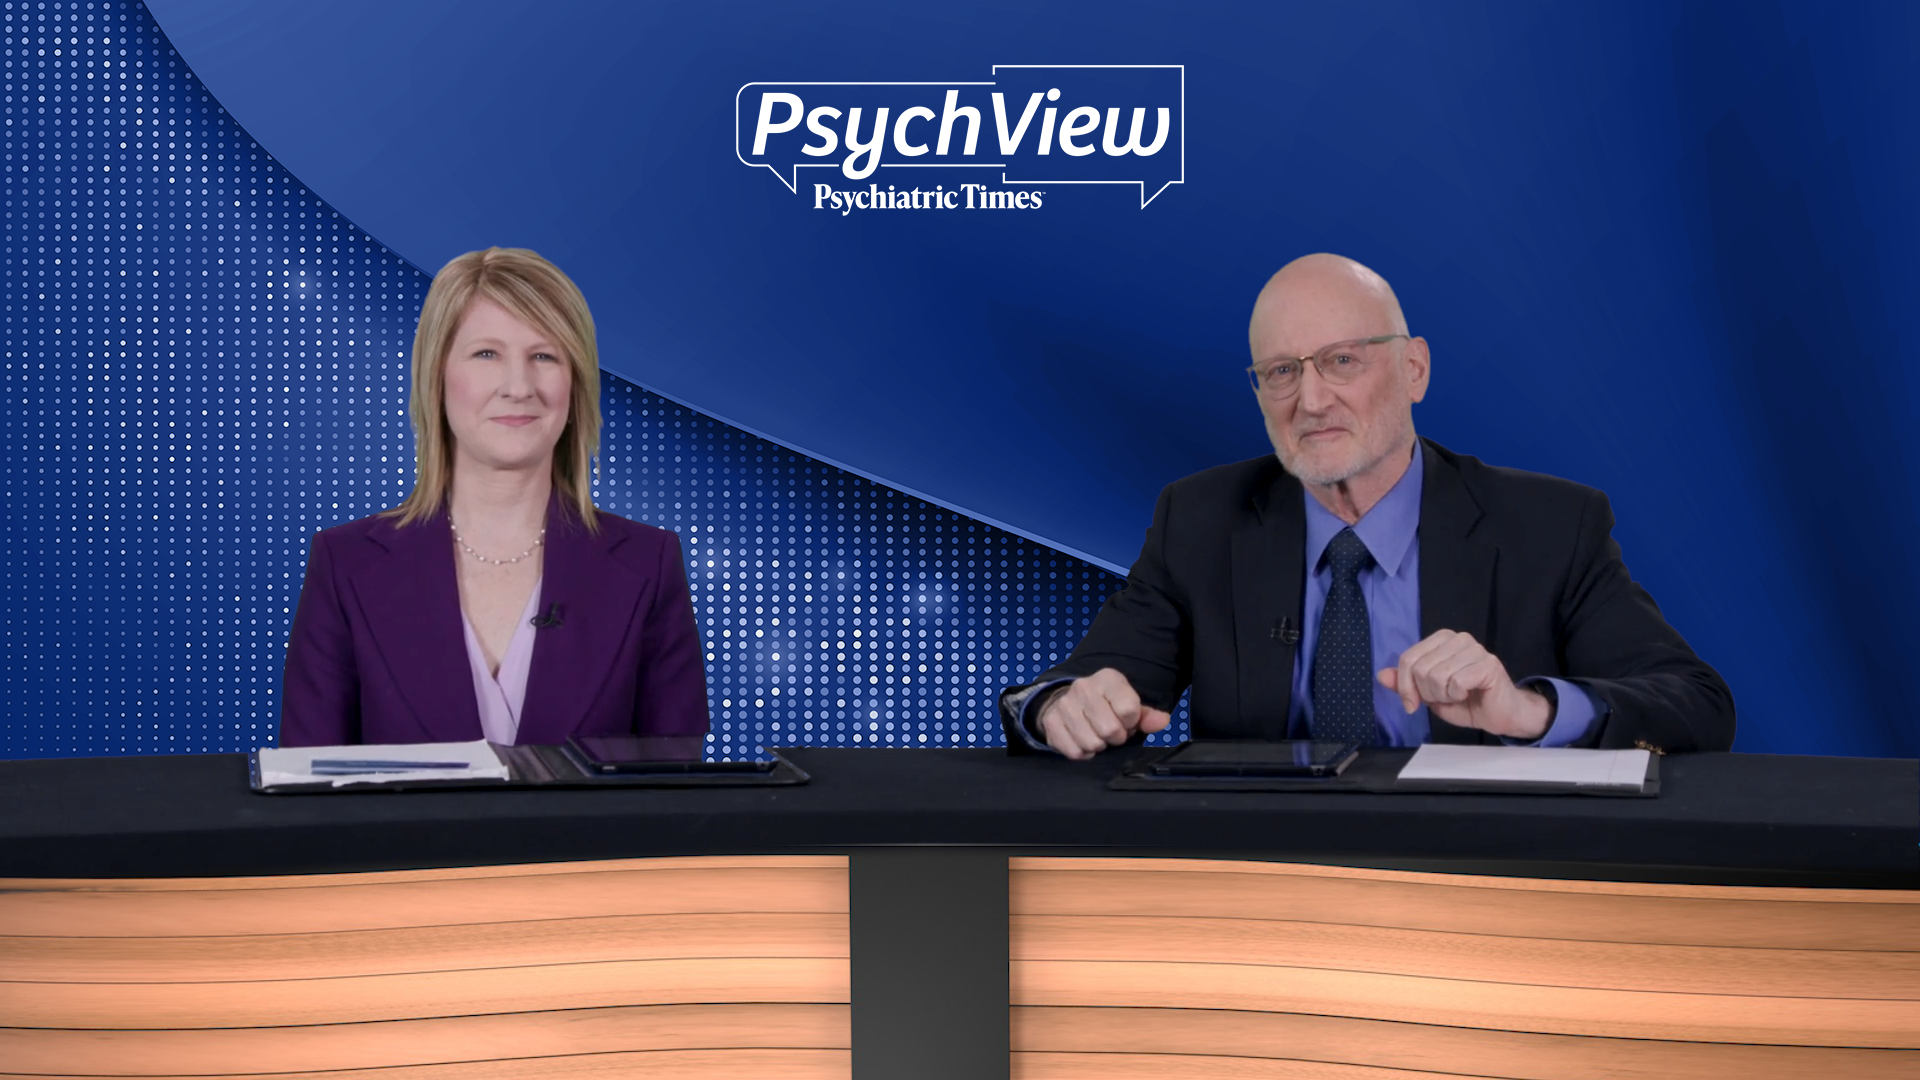 Video 2 - "Exploration into the Management of the Three Symptom Domains of Schizophrenia"